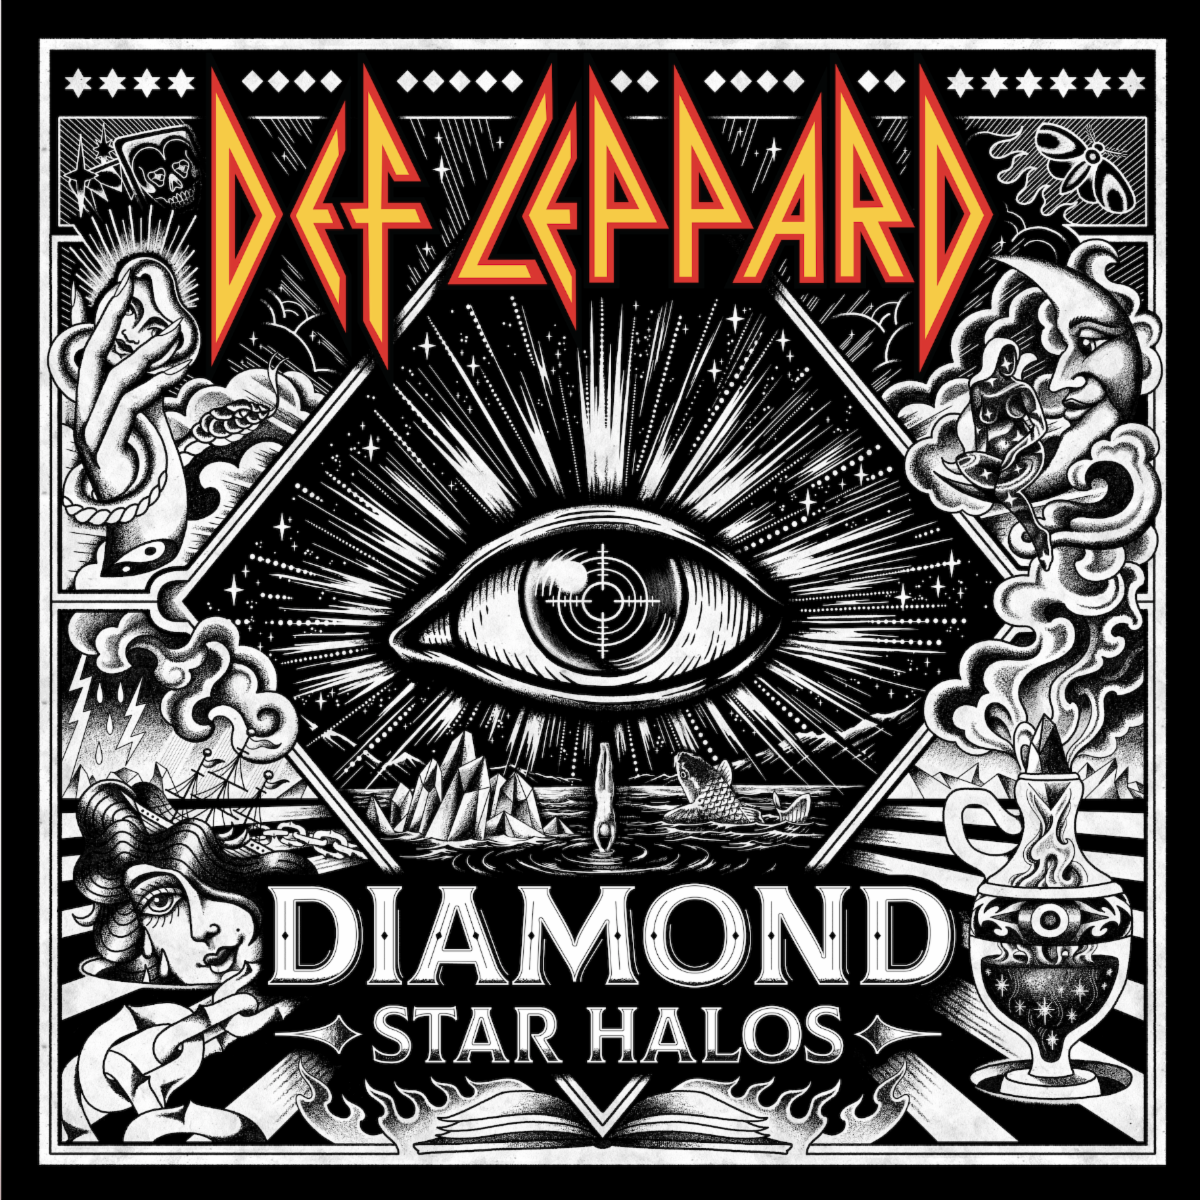 ROCK LEGENDS DEF LEPPARD’s NEW ALBUM DIAMOND STAR HALOS OUT TODAY